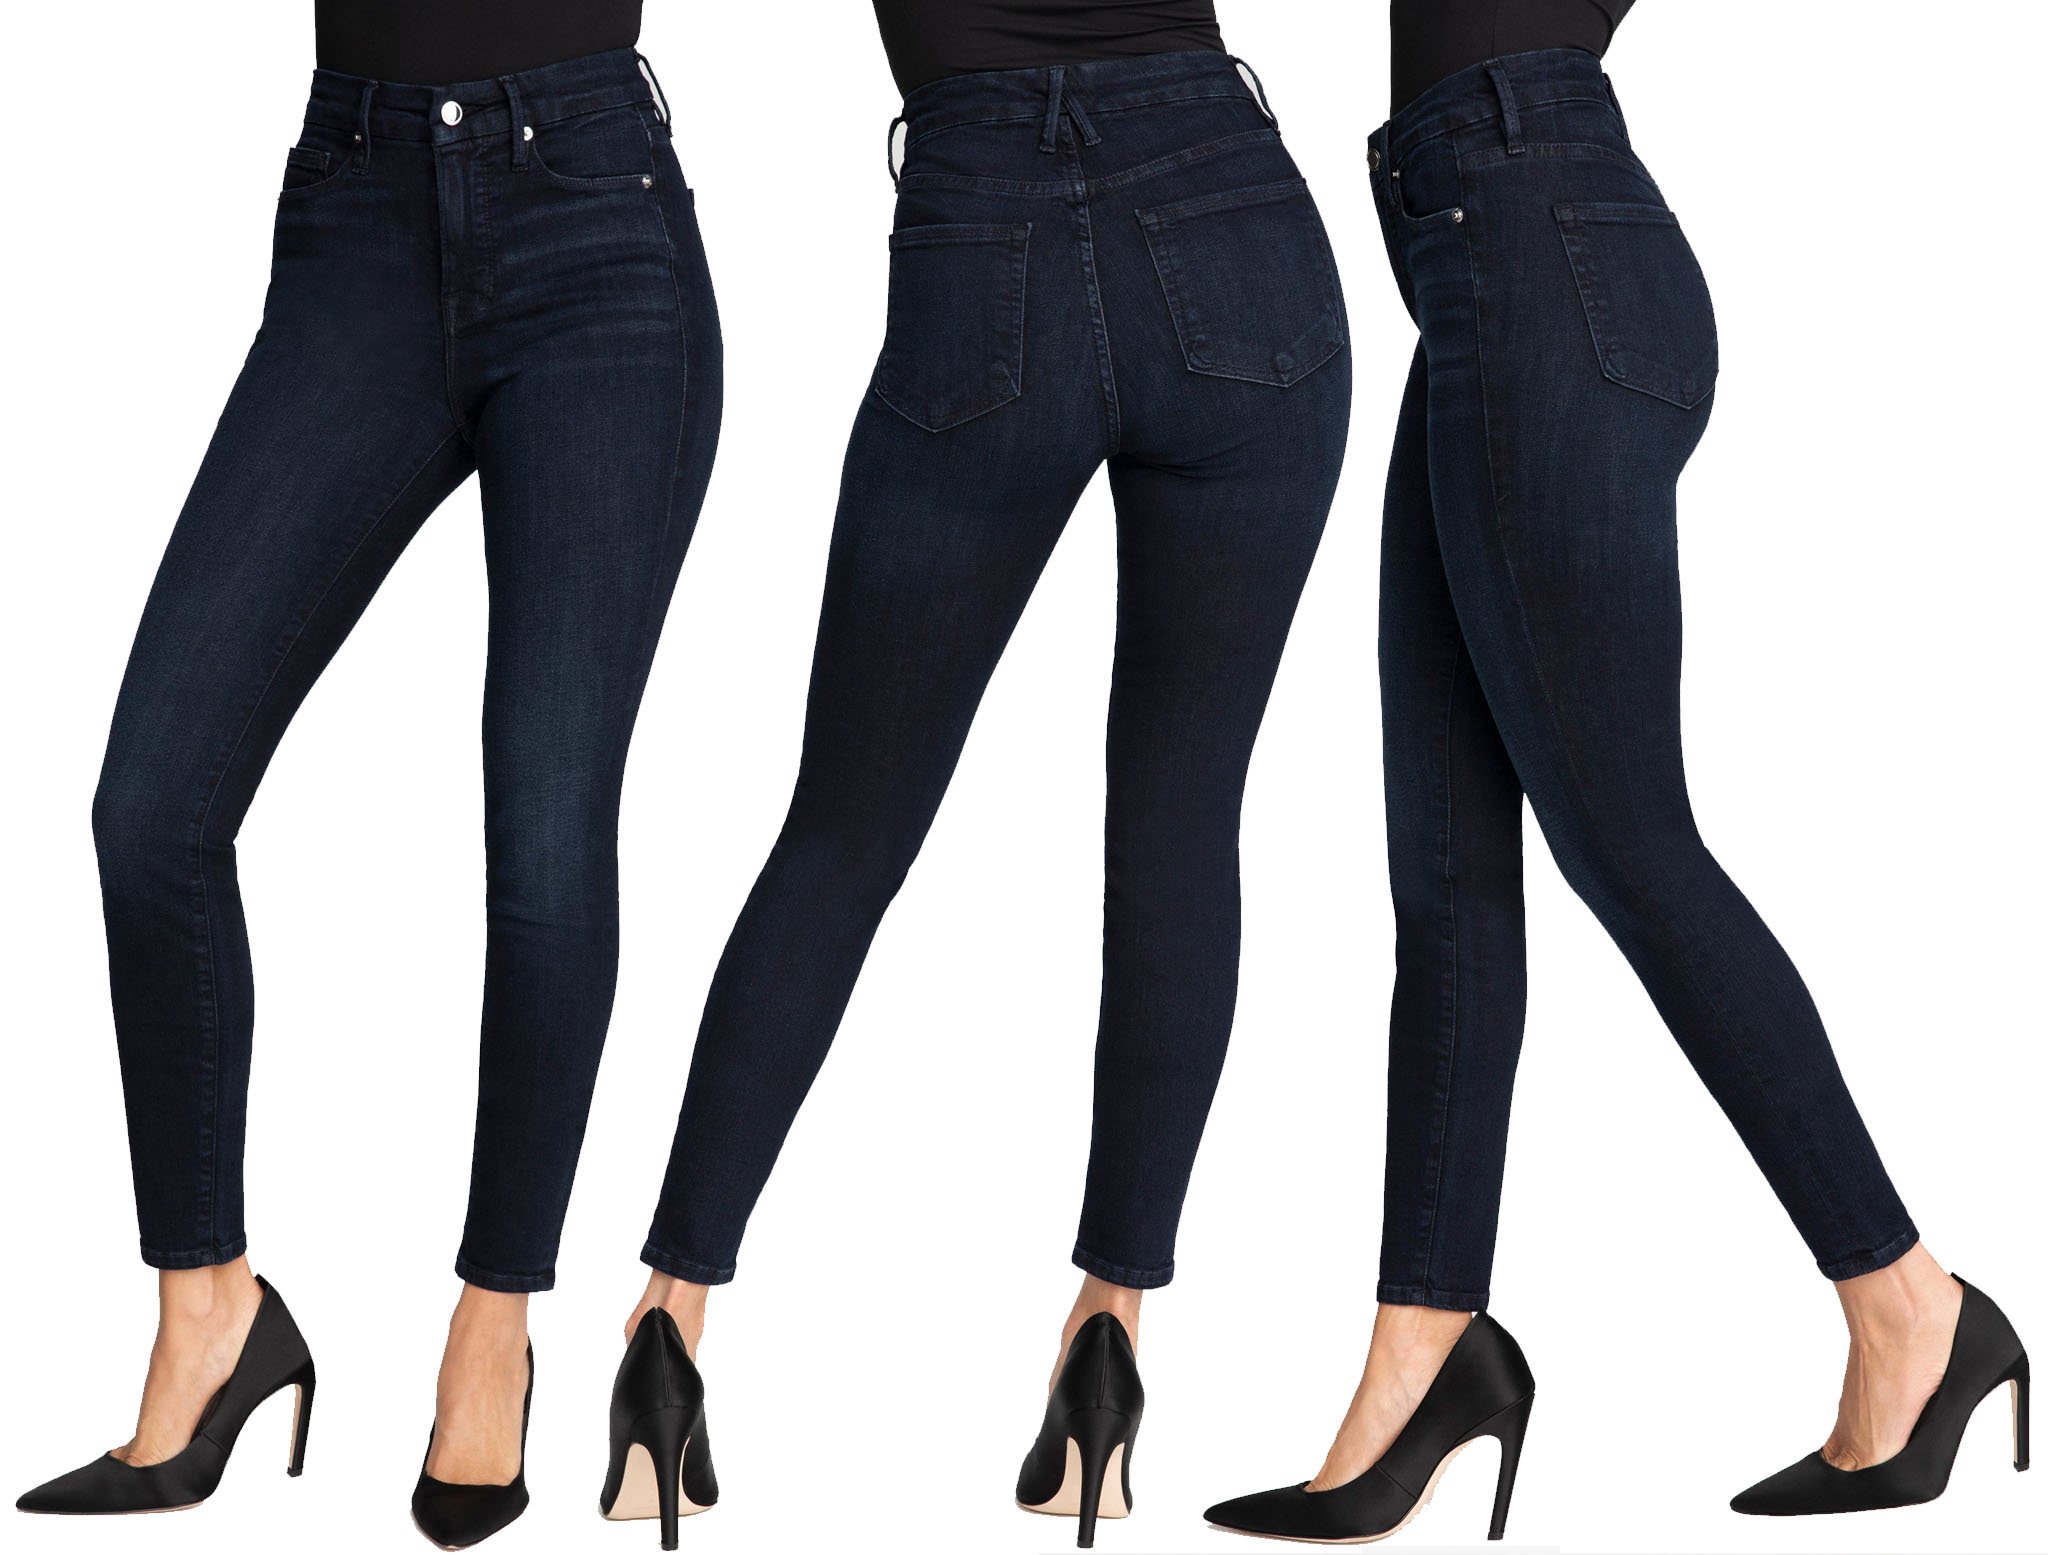 Good American's best-selling style, the Good Legs, now features a flattering cropped length